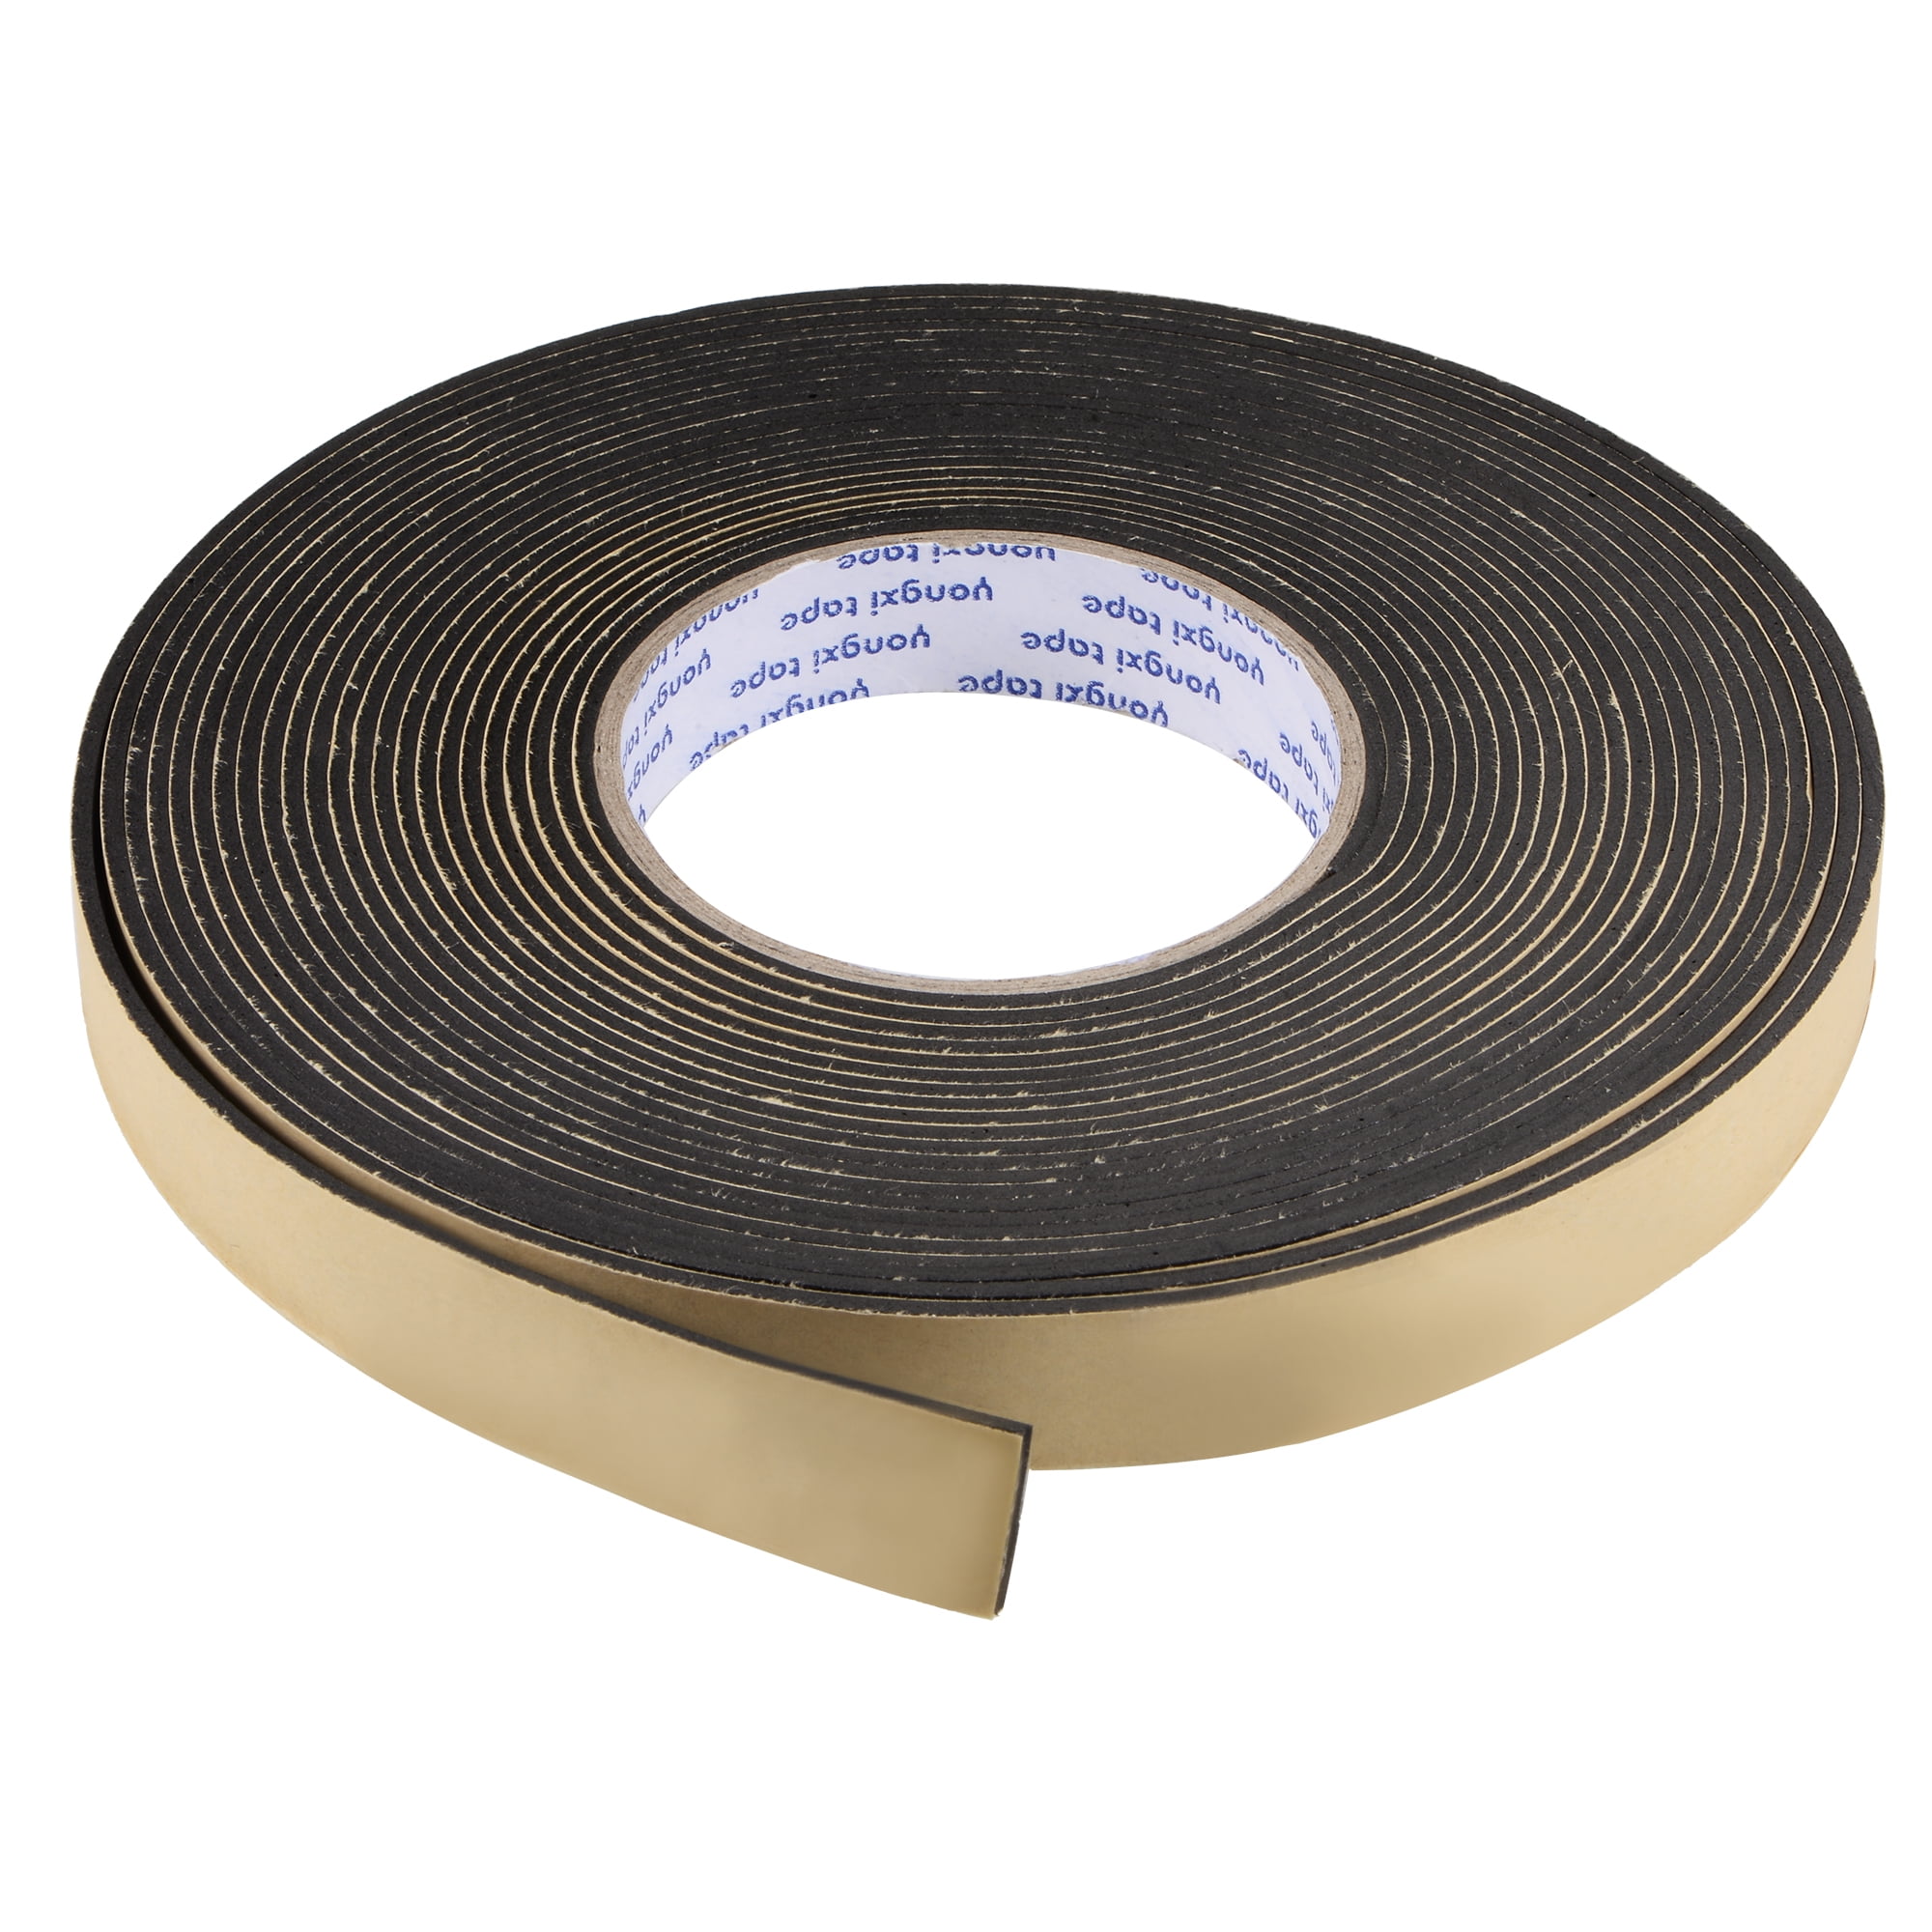 Uxcell 40mm Round EVA Foam Double Sided Sticky Pads Adhesive Tape Black 30  Pack